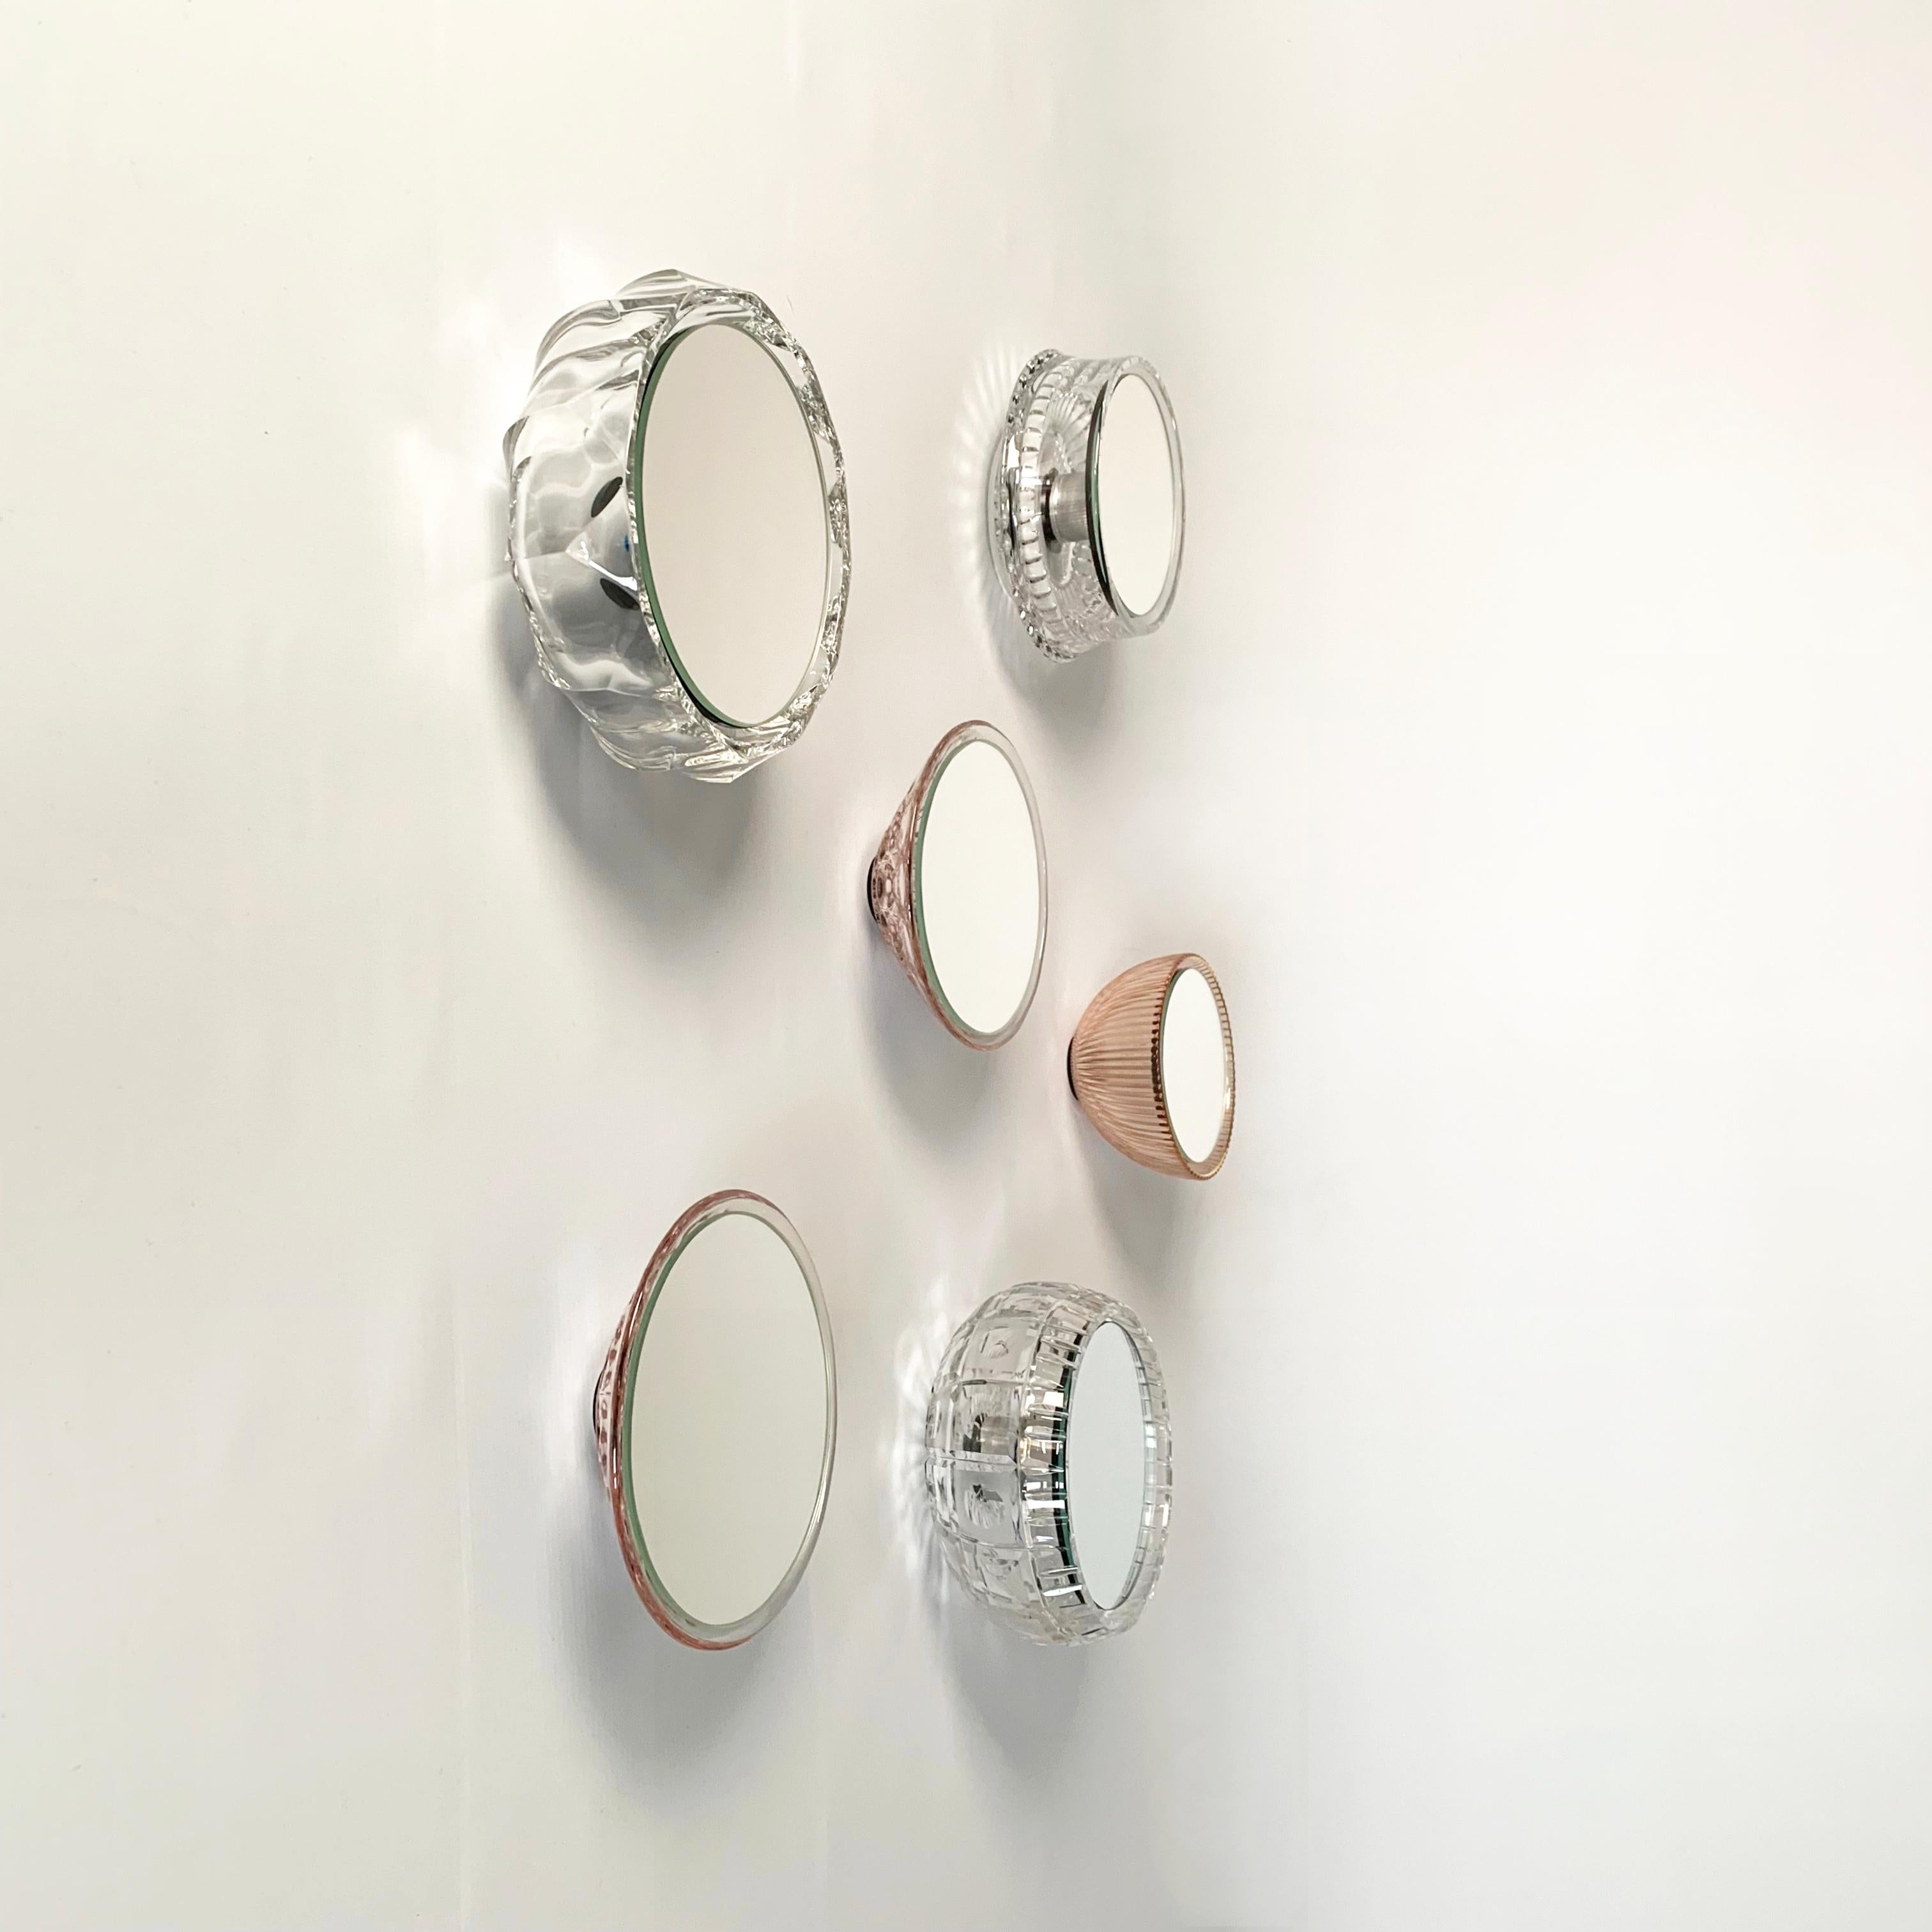 Wall mirrors - Saturn, made of vintage glass bowls:
Floating glass bowls and mirrors - invisible construction
The vintage glass bowl is easily and securely attached to the wall. A hole was drilled in the glass bowl and a metal sleeve was inserted.